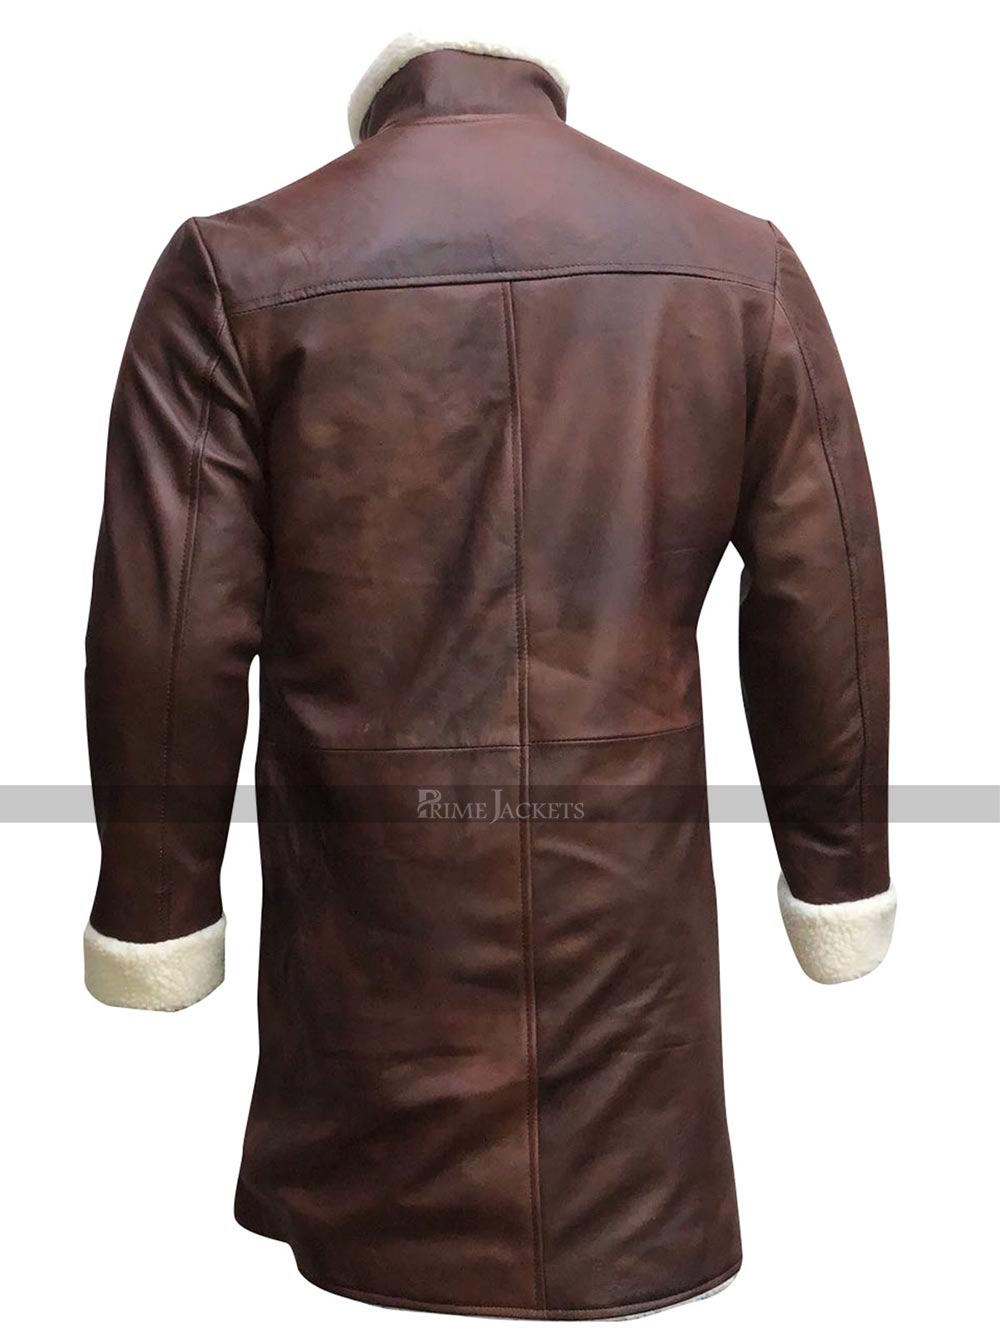 Knights of the Roundtable King Arthur Charlie Hunnam Coat